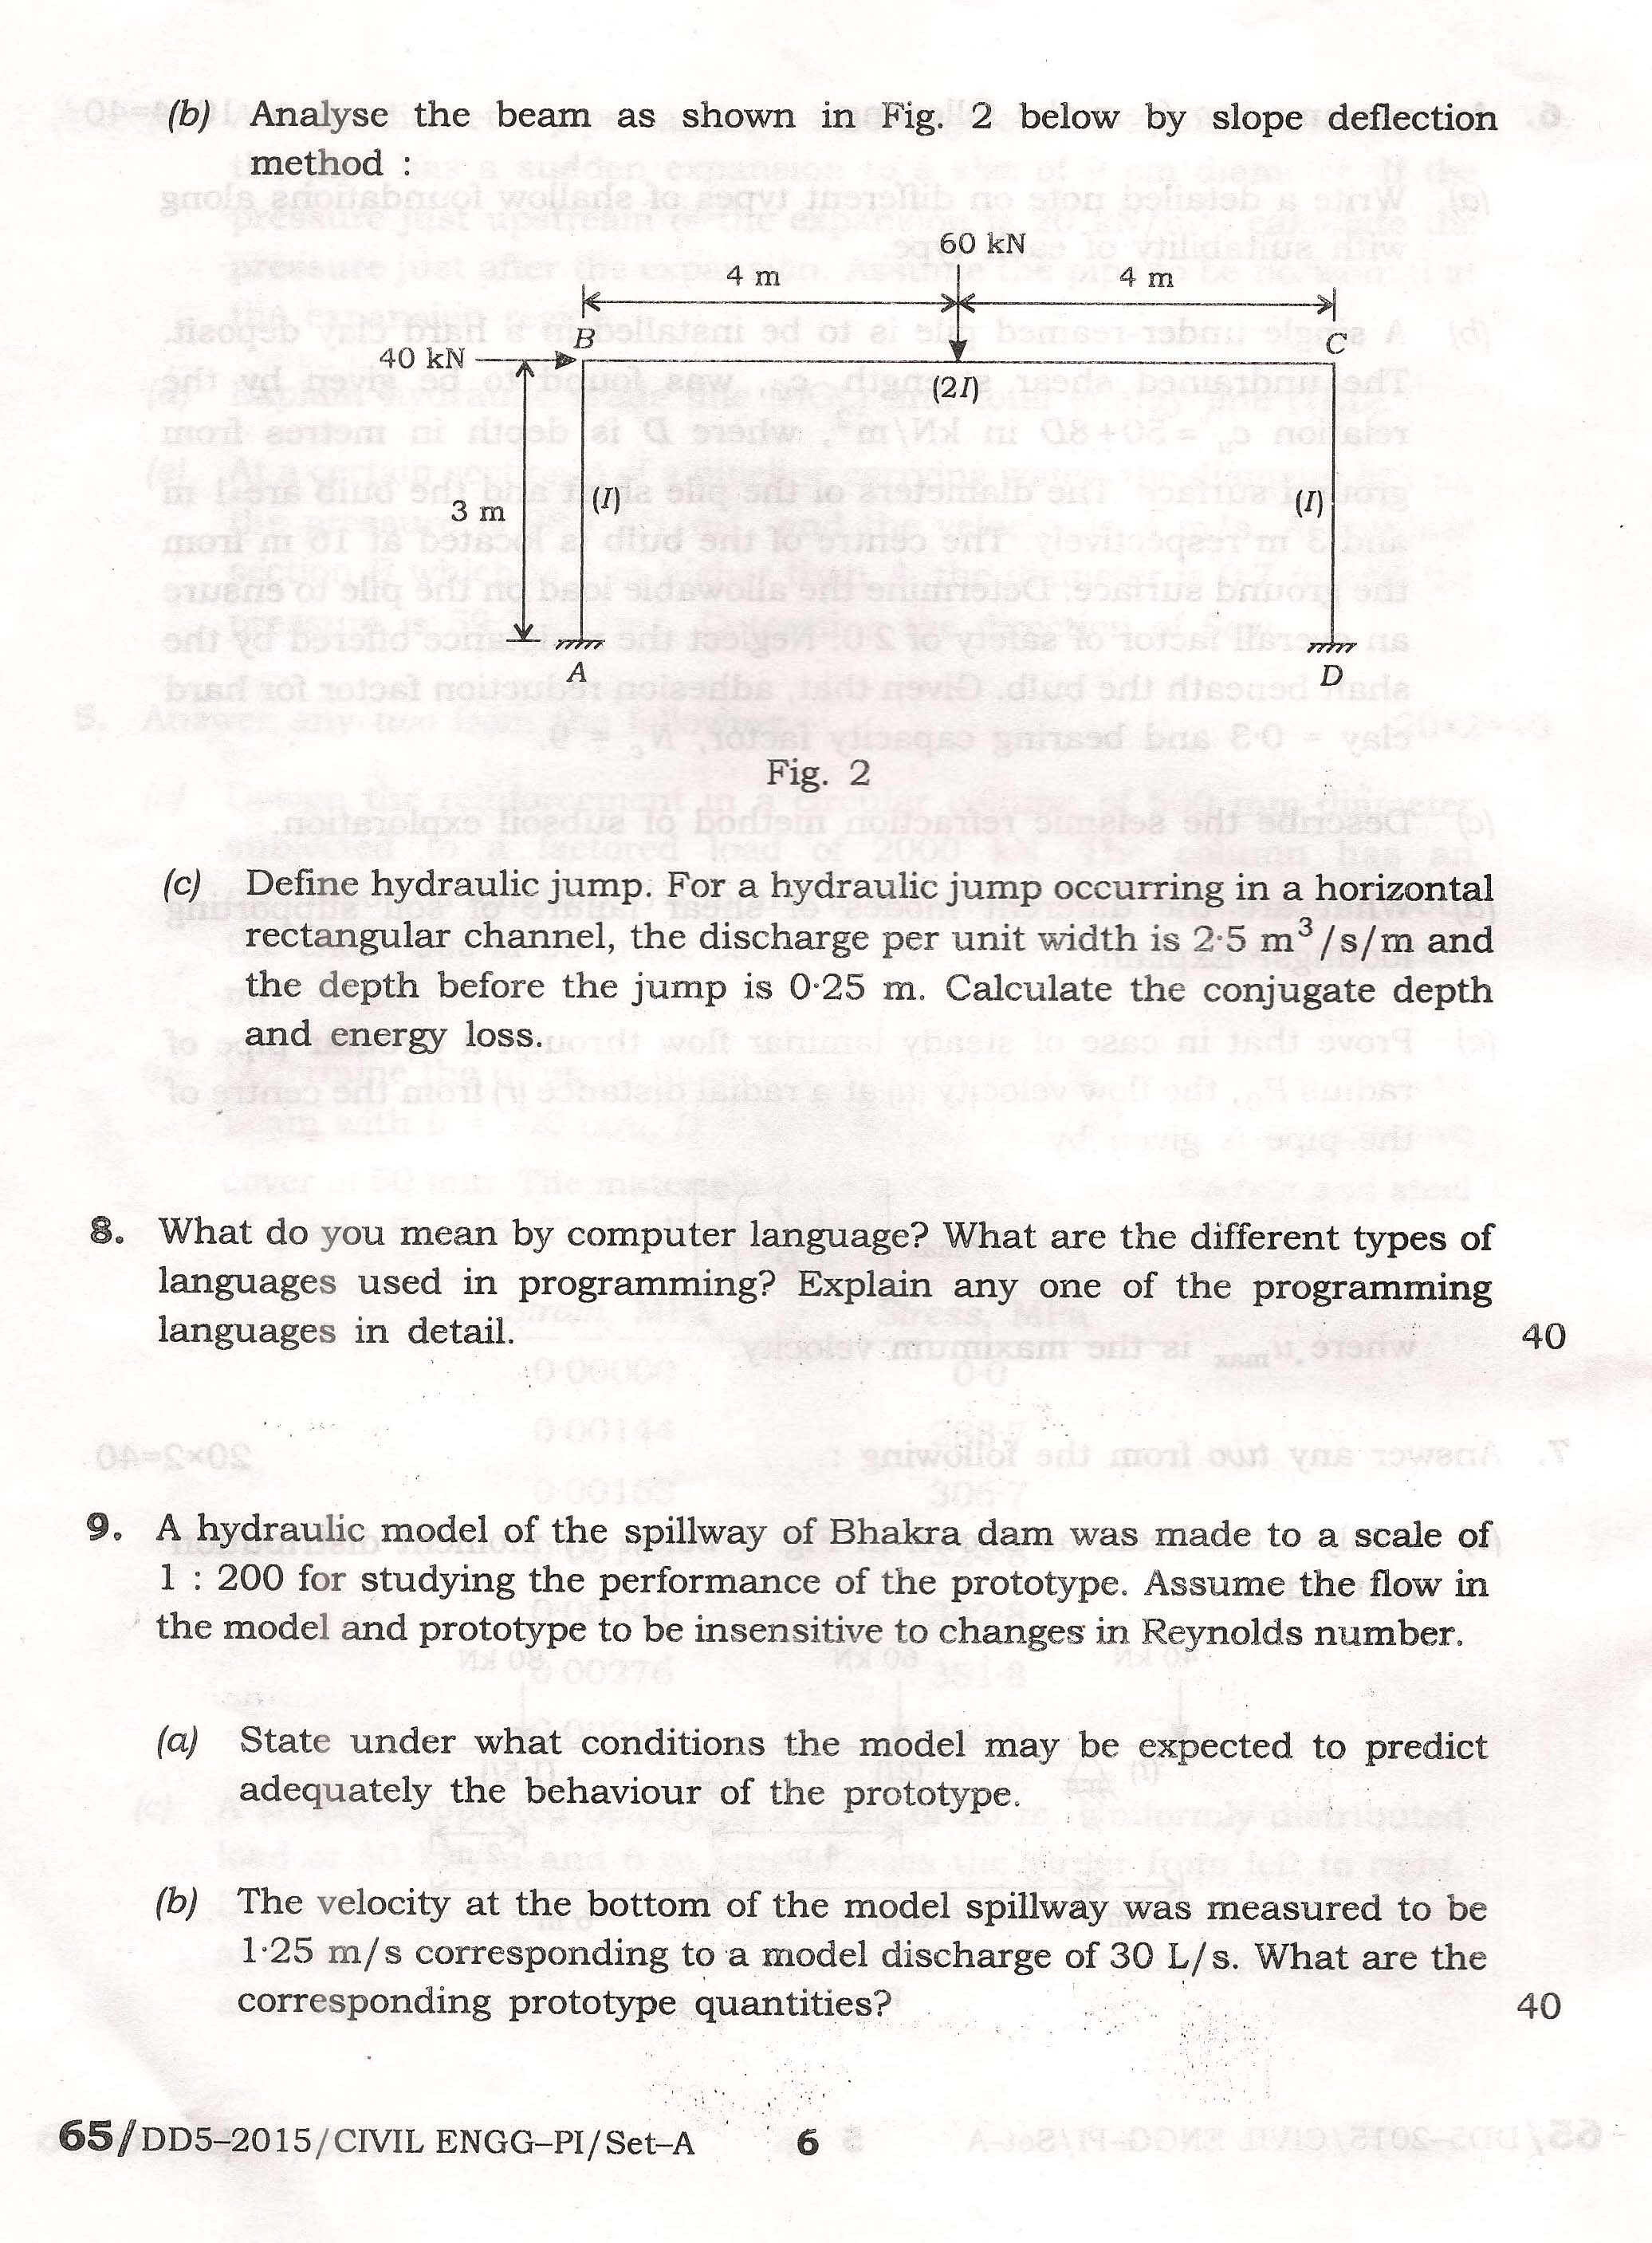 APPSC Combined Competitive Main Exam 2015 Civil Engineering Paper I 6